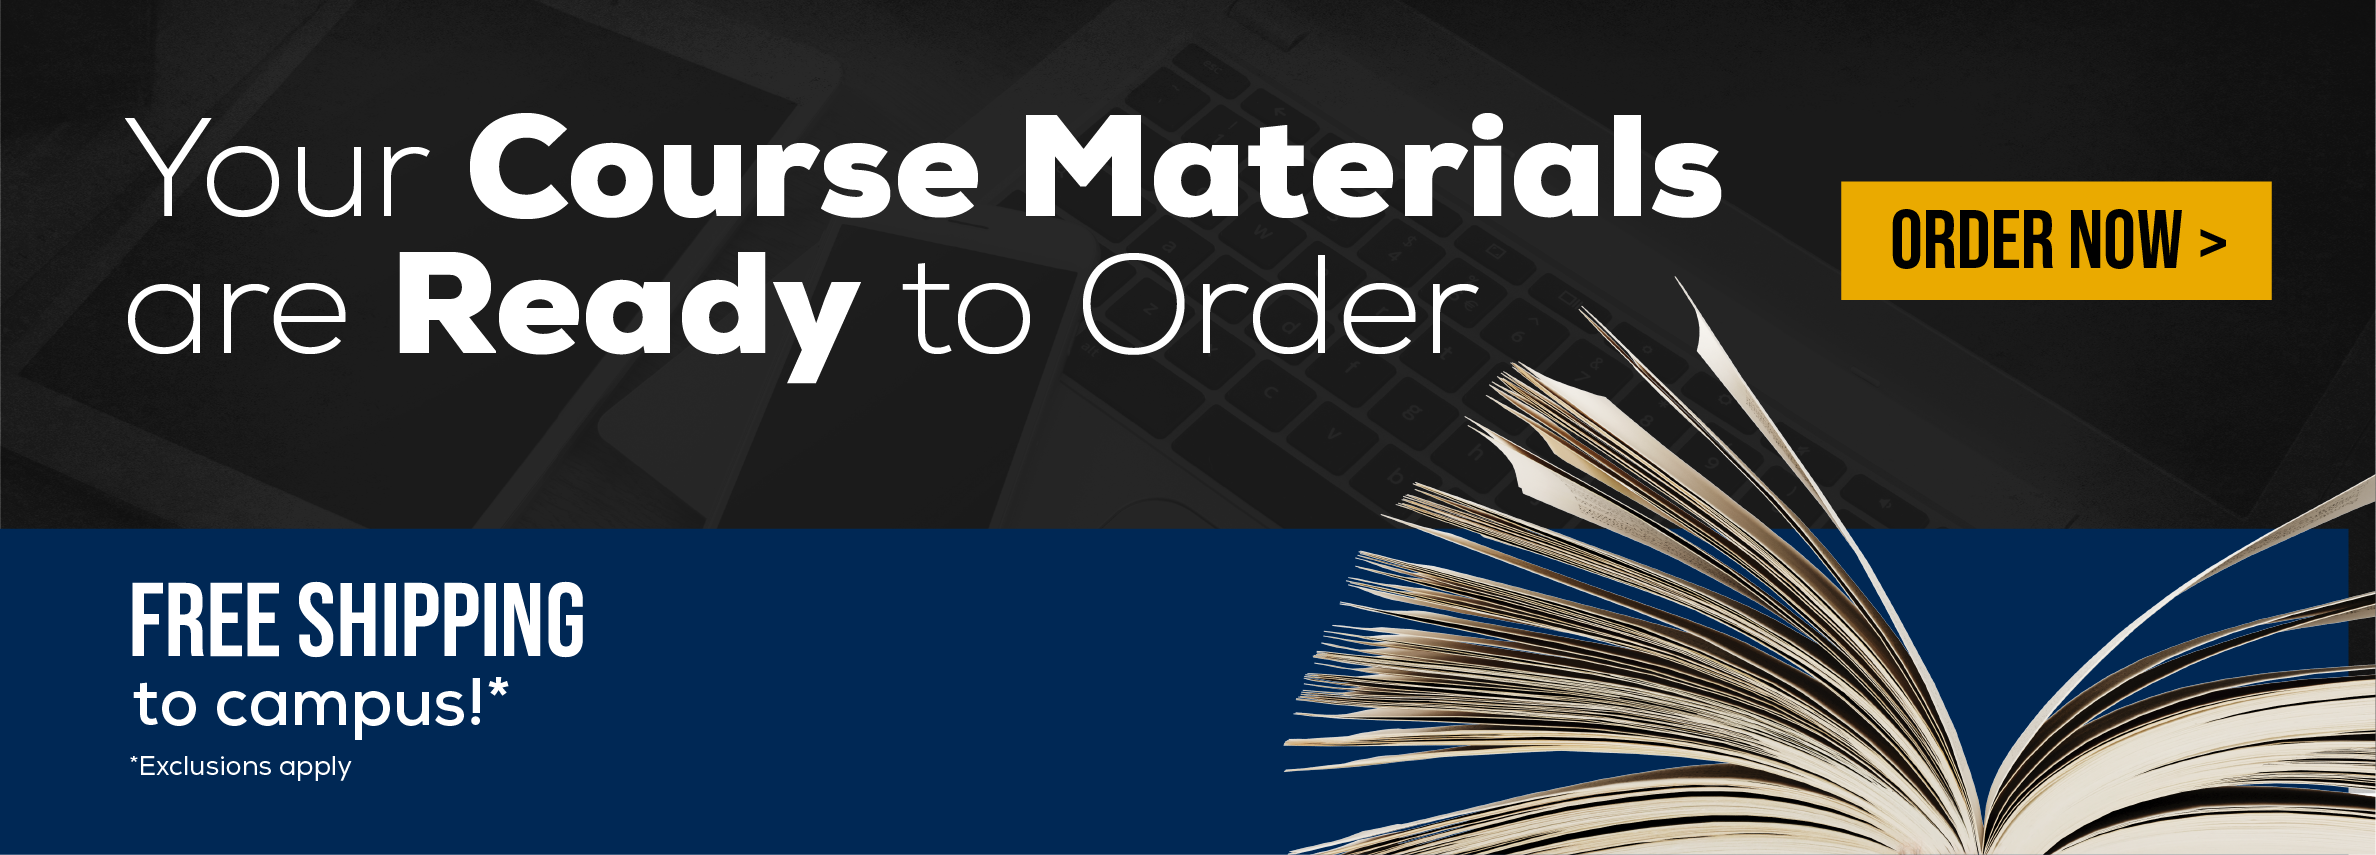 Your Course Materials are Ready to Order! Order Now. Free shipping to campus.* *Exclusions may apply.